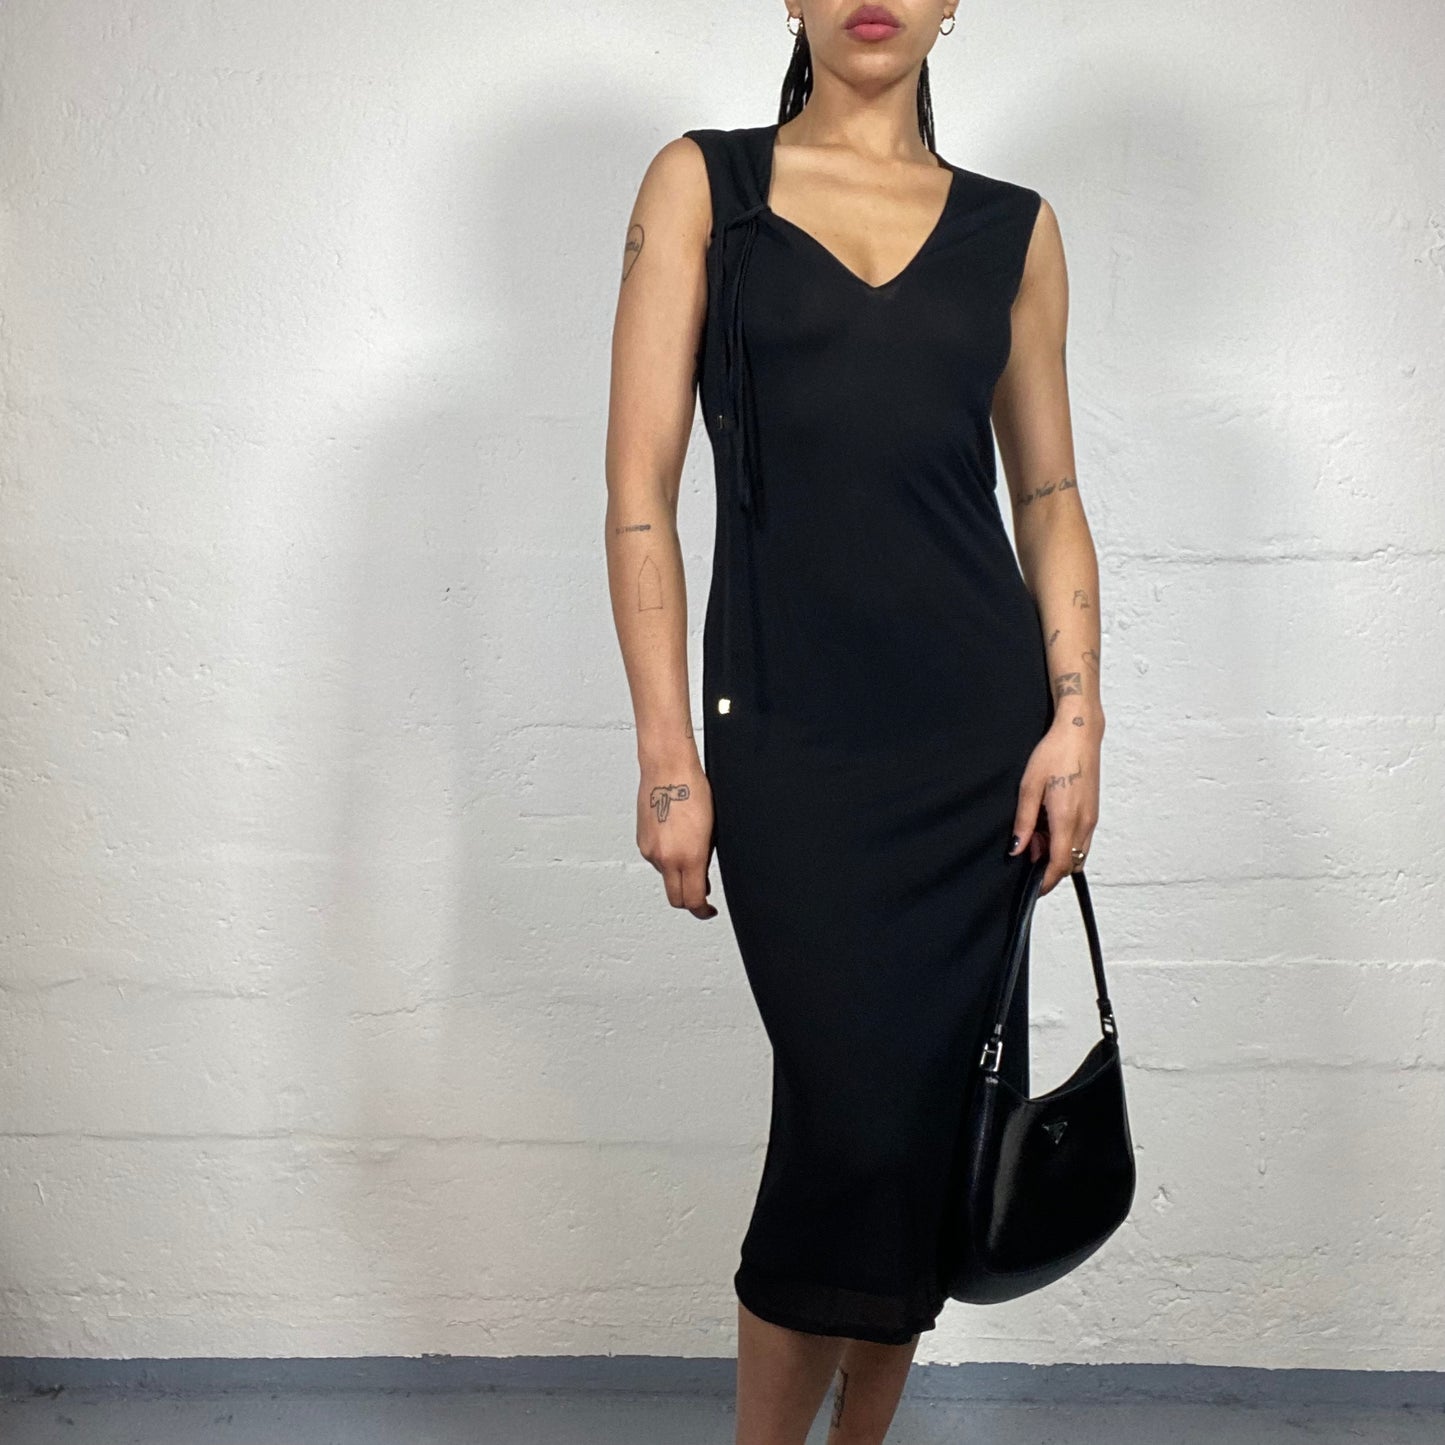 Vintage 2000's Archive Gucci Old Money Classy Black Slim Fit Midi Dress with Hanging Stripes Details (M)